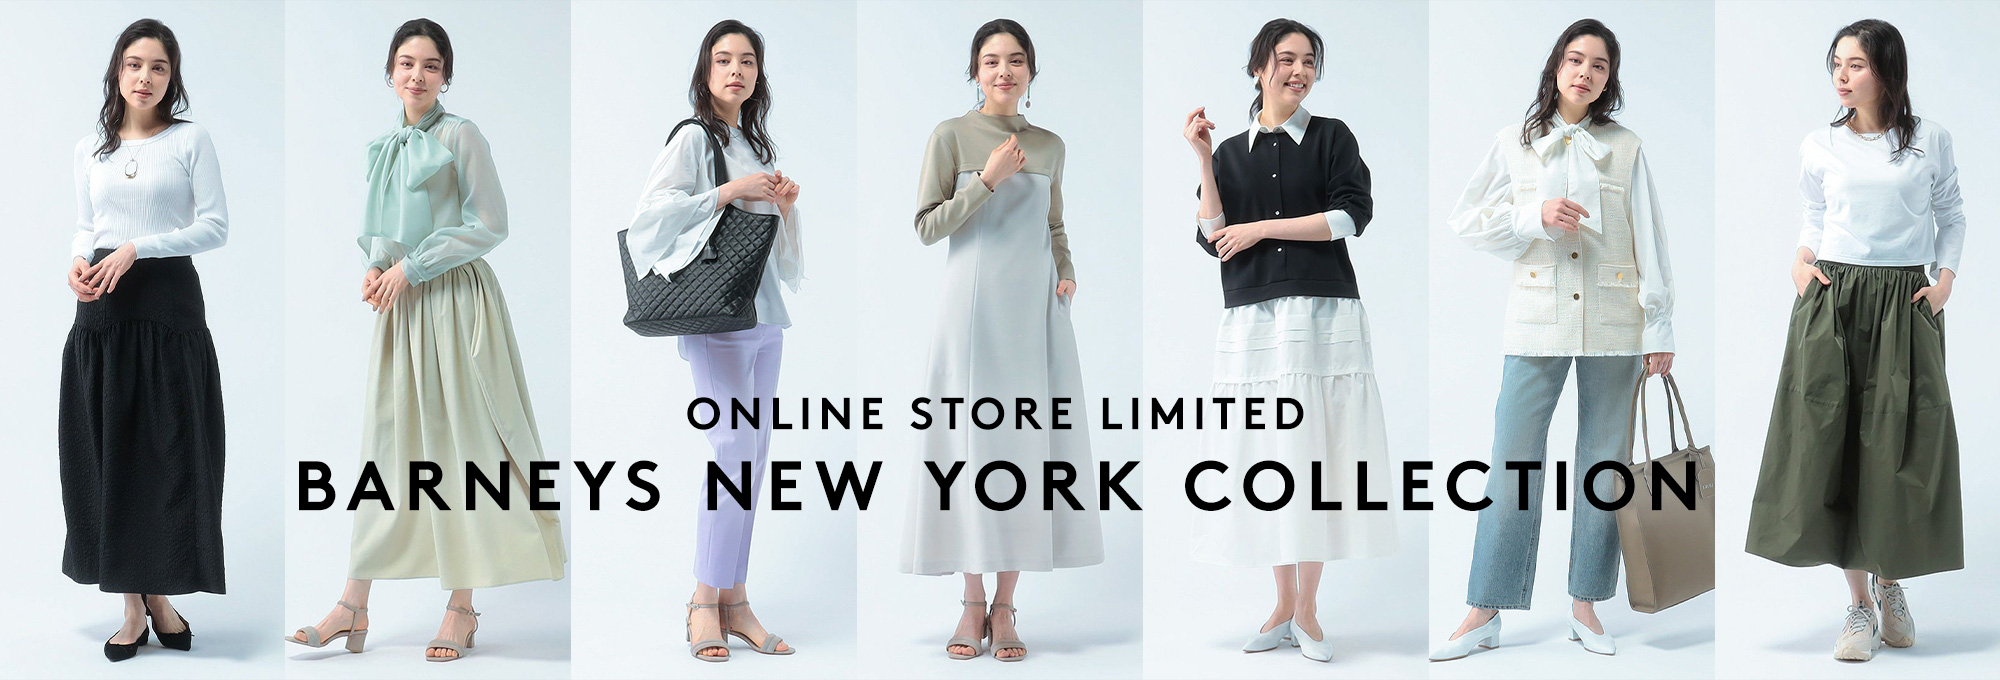 ONLINE STORE LIMITED BARNEYS NEW YORK COLLECTION